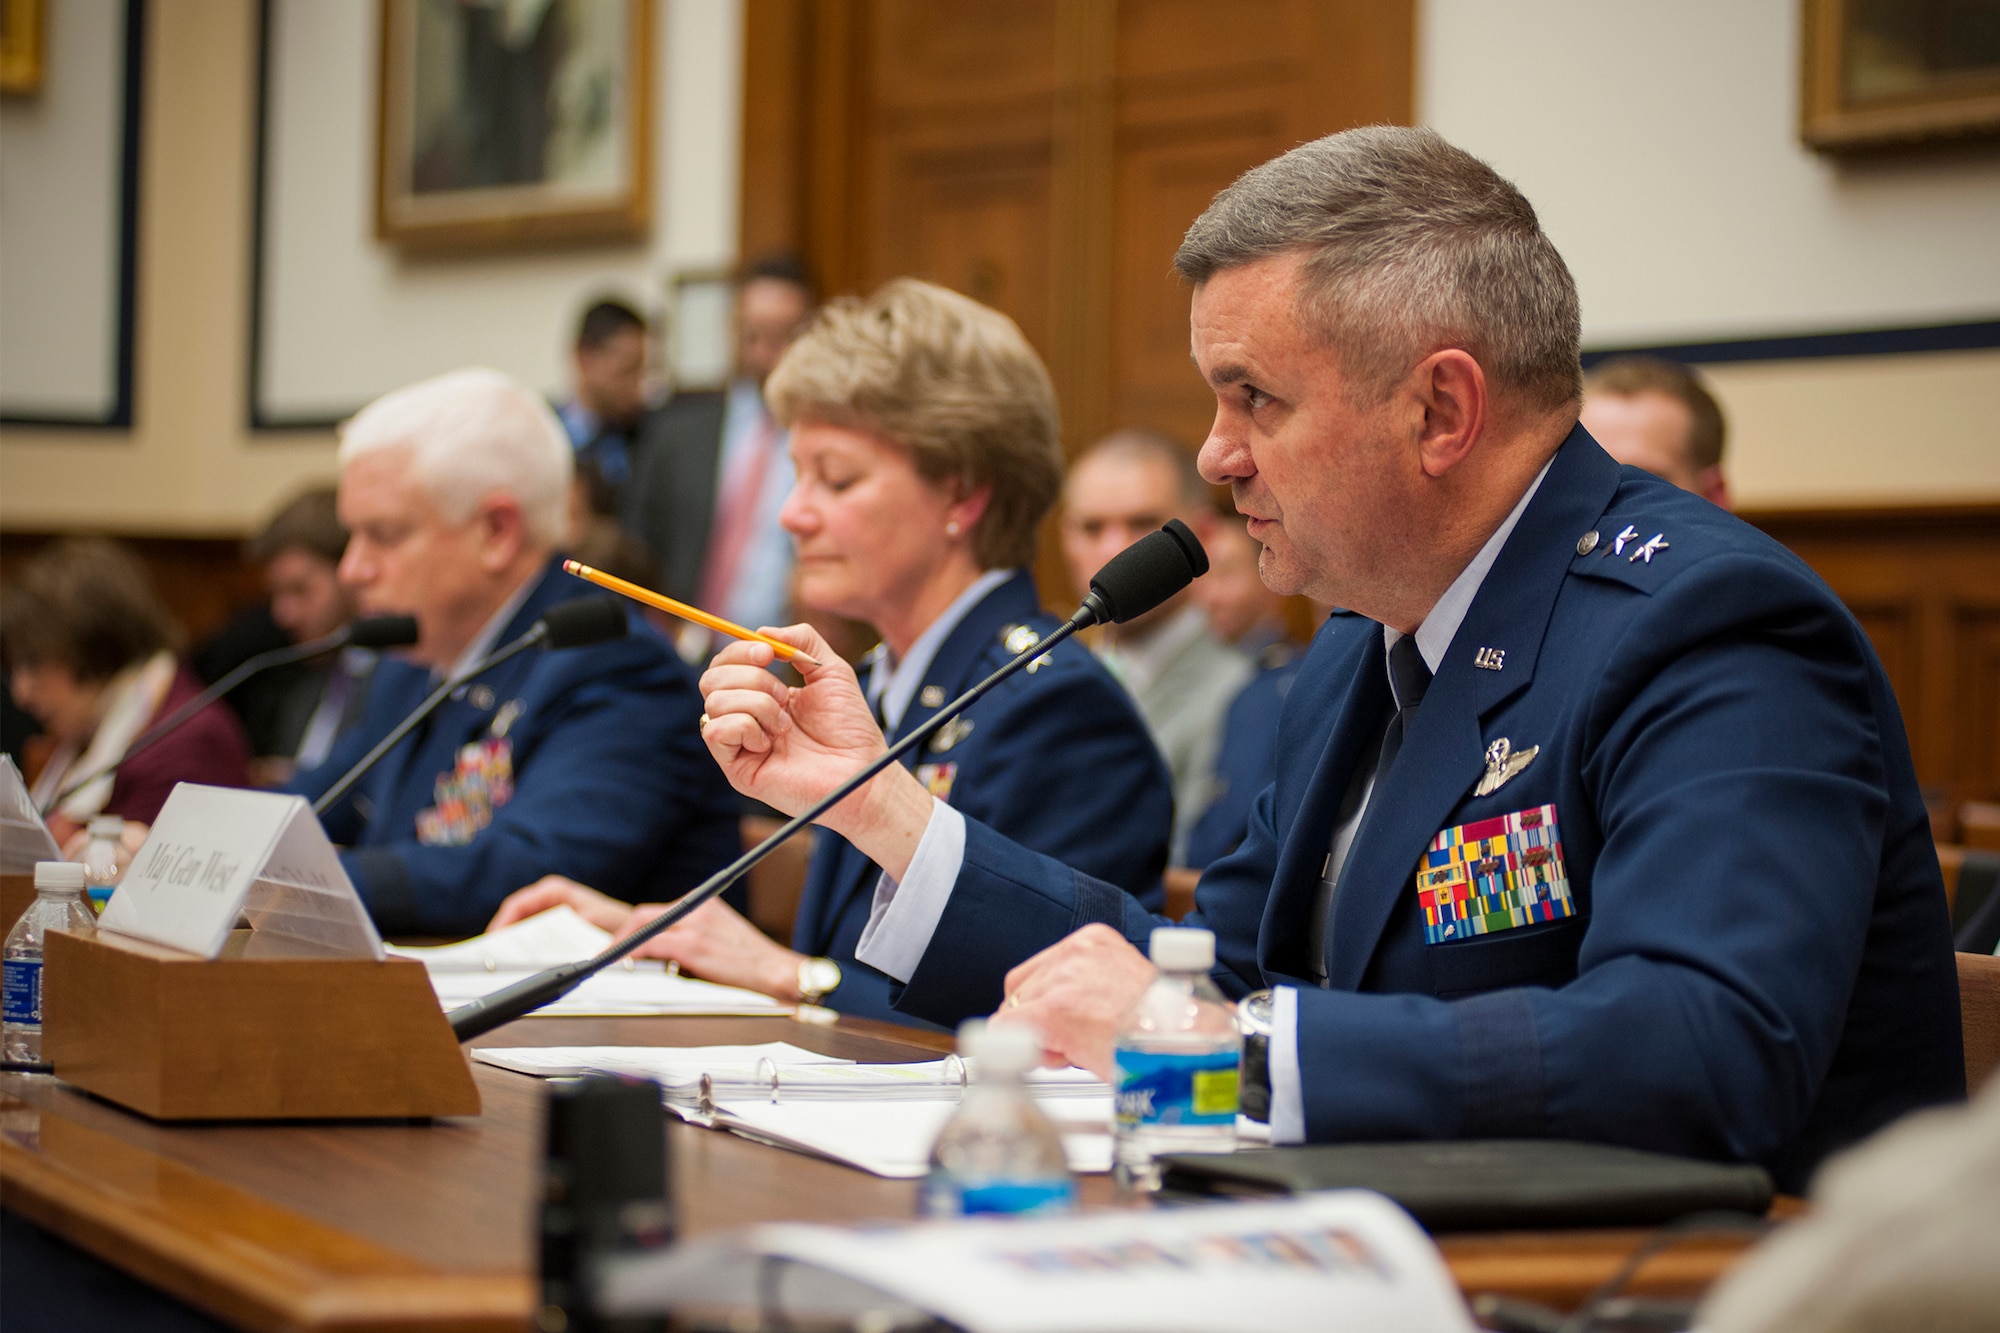 Maj. Gen. Scott D. West, the director of current operations and deputy chief of staff for operations, Headquarters U.S. Air Force, discusses his top priorities for the Air Force during a House Armed Services Committee hearing on Capitol Hill, March 22, 2017. During the event, West, alongside leaders from the Air Force Reserve and Air National Guard, discussed issues facing the Air Force with members of Congress. (U.S. Air Force photo/Tech. Sgt. Kat Justen)